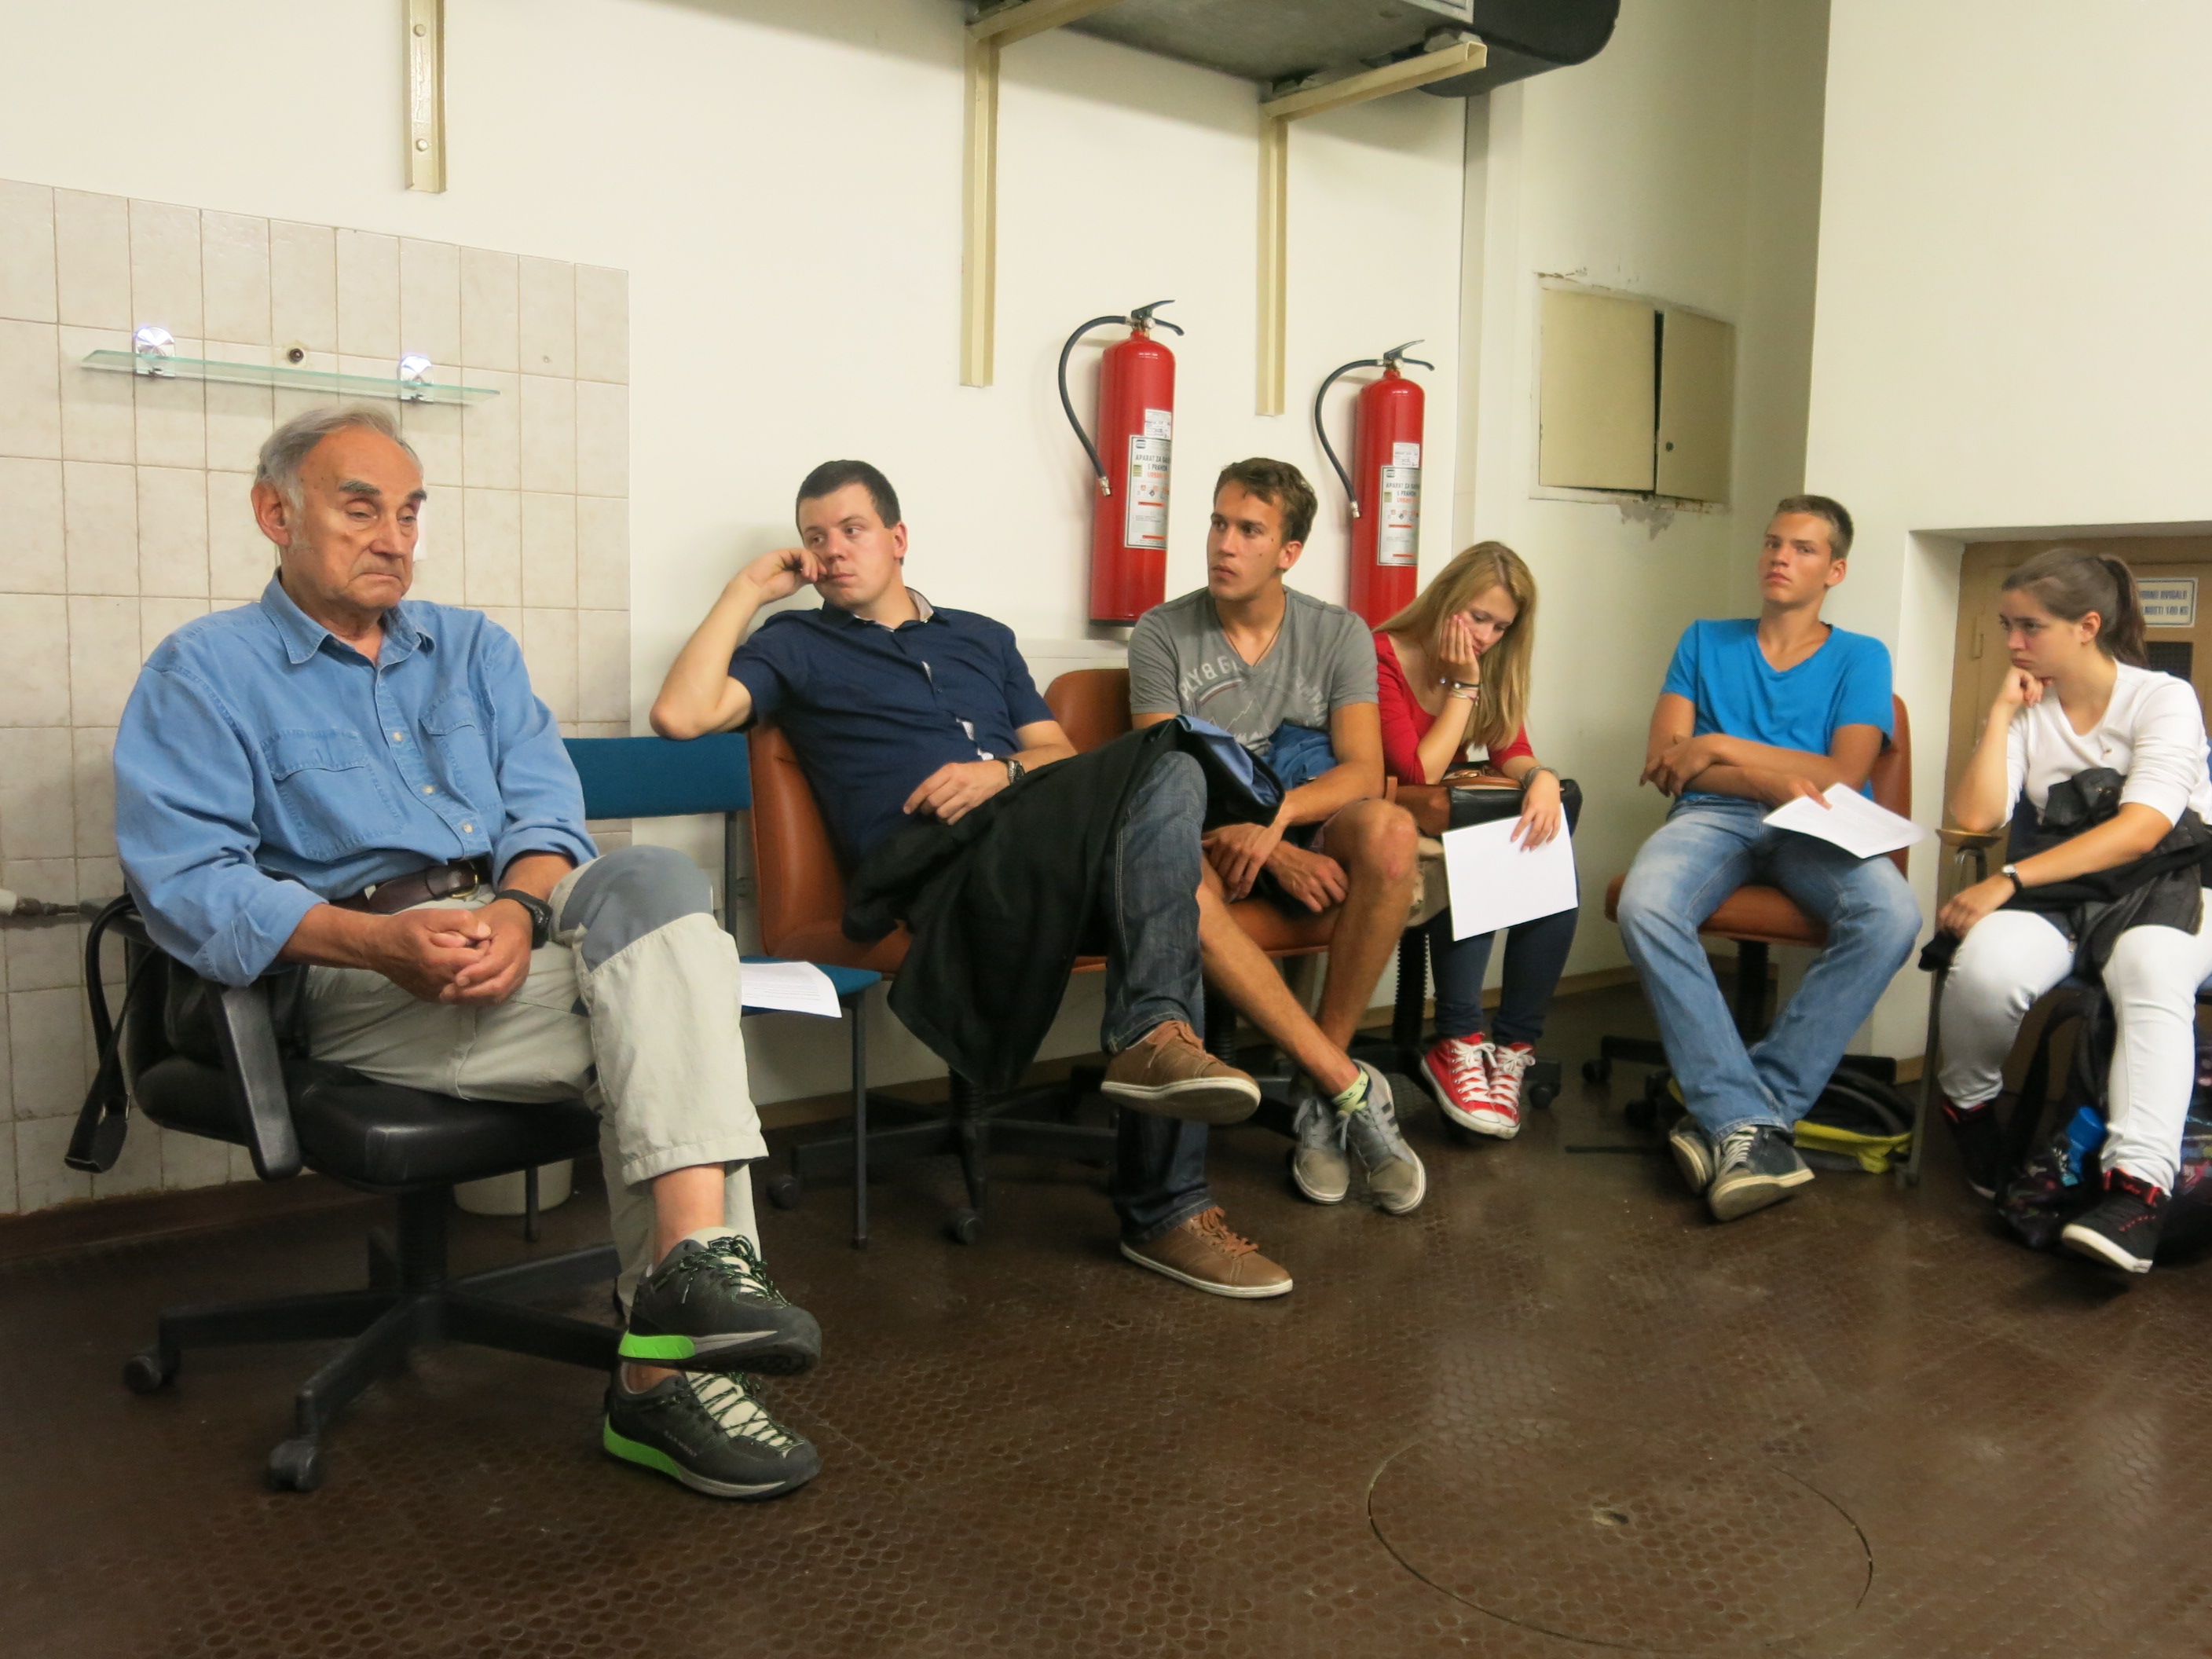 Testimony of Andrej Aplenc about imprisonment on the island of Goli, August 27, 2014.